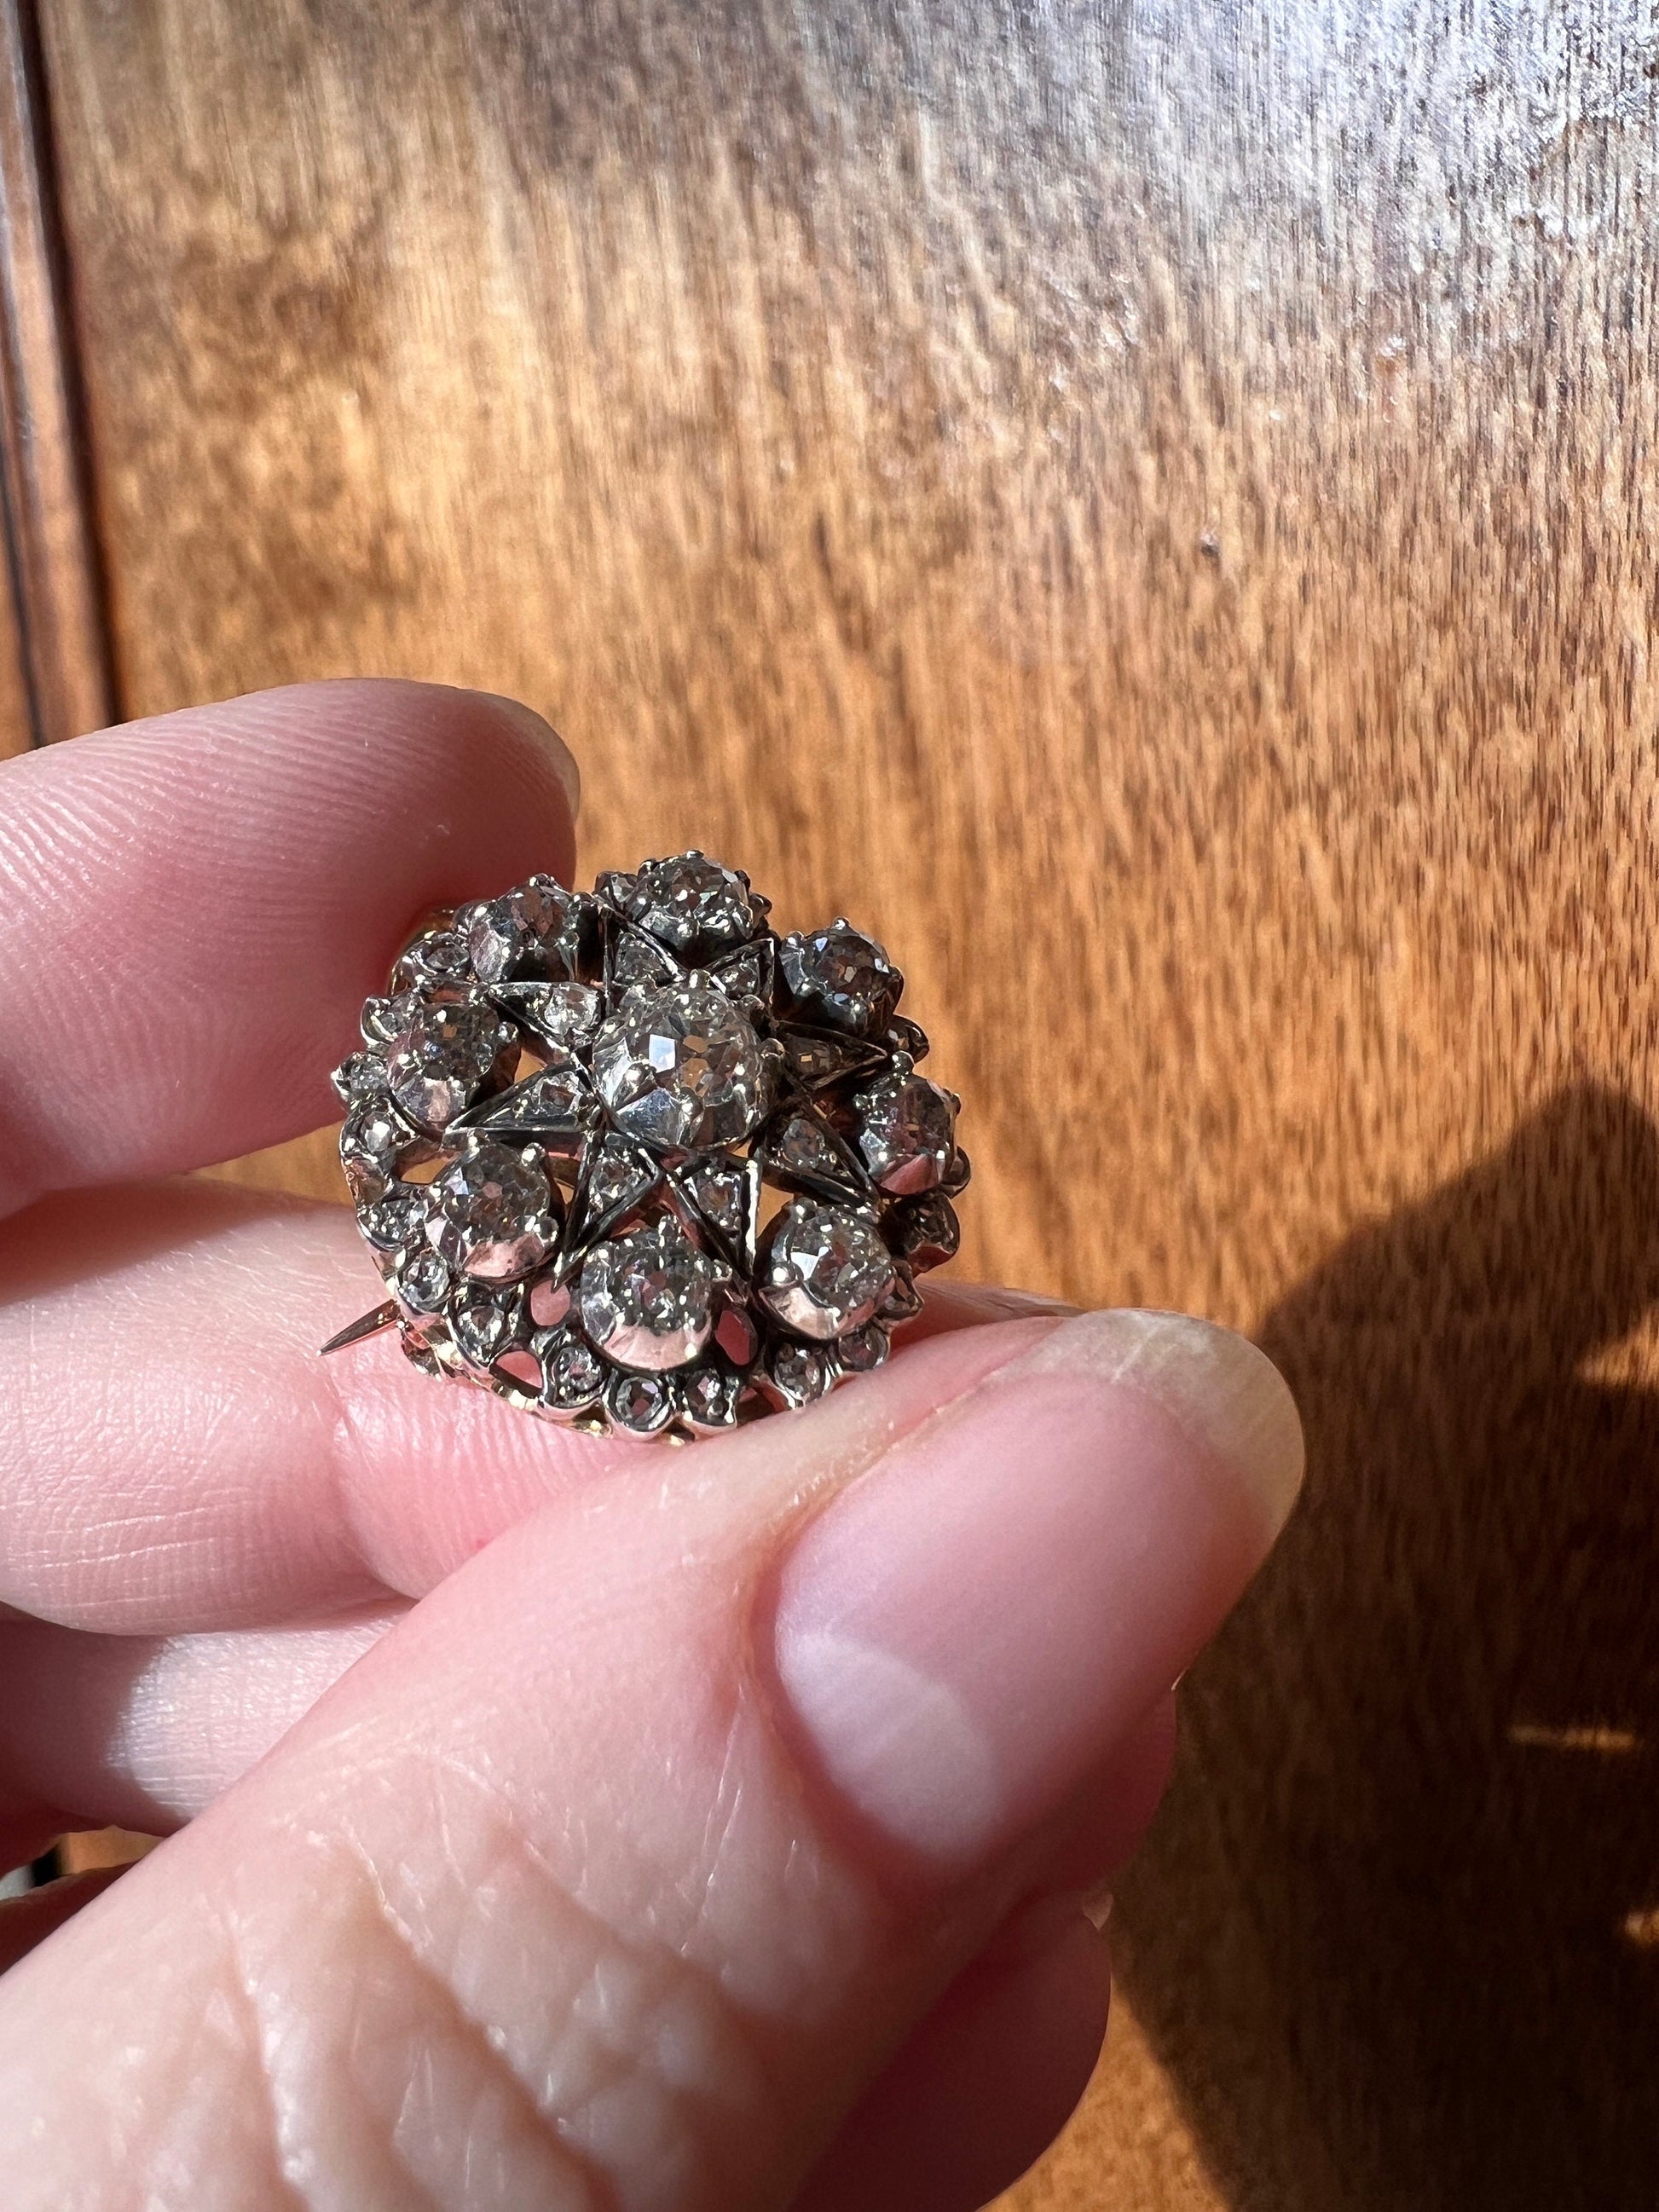 STAR Antique 41 Rose & Old Mine Cut DIAMOND Cluster PENDANT 1.4 Carats 18k Gold Pin Brooch Victorian Gift Belle Epoque Bridal Something Old